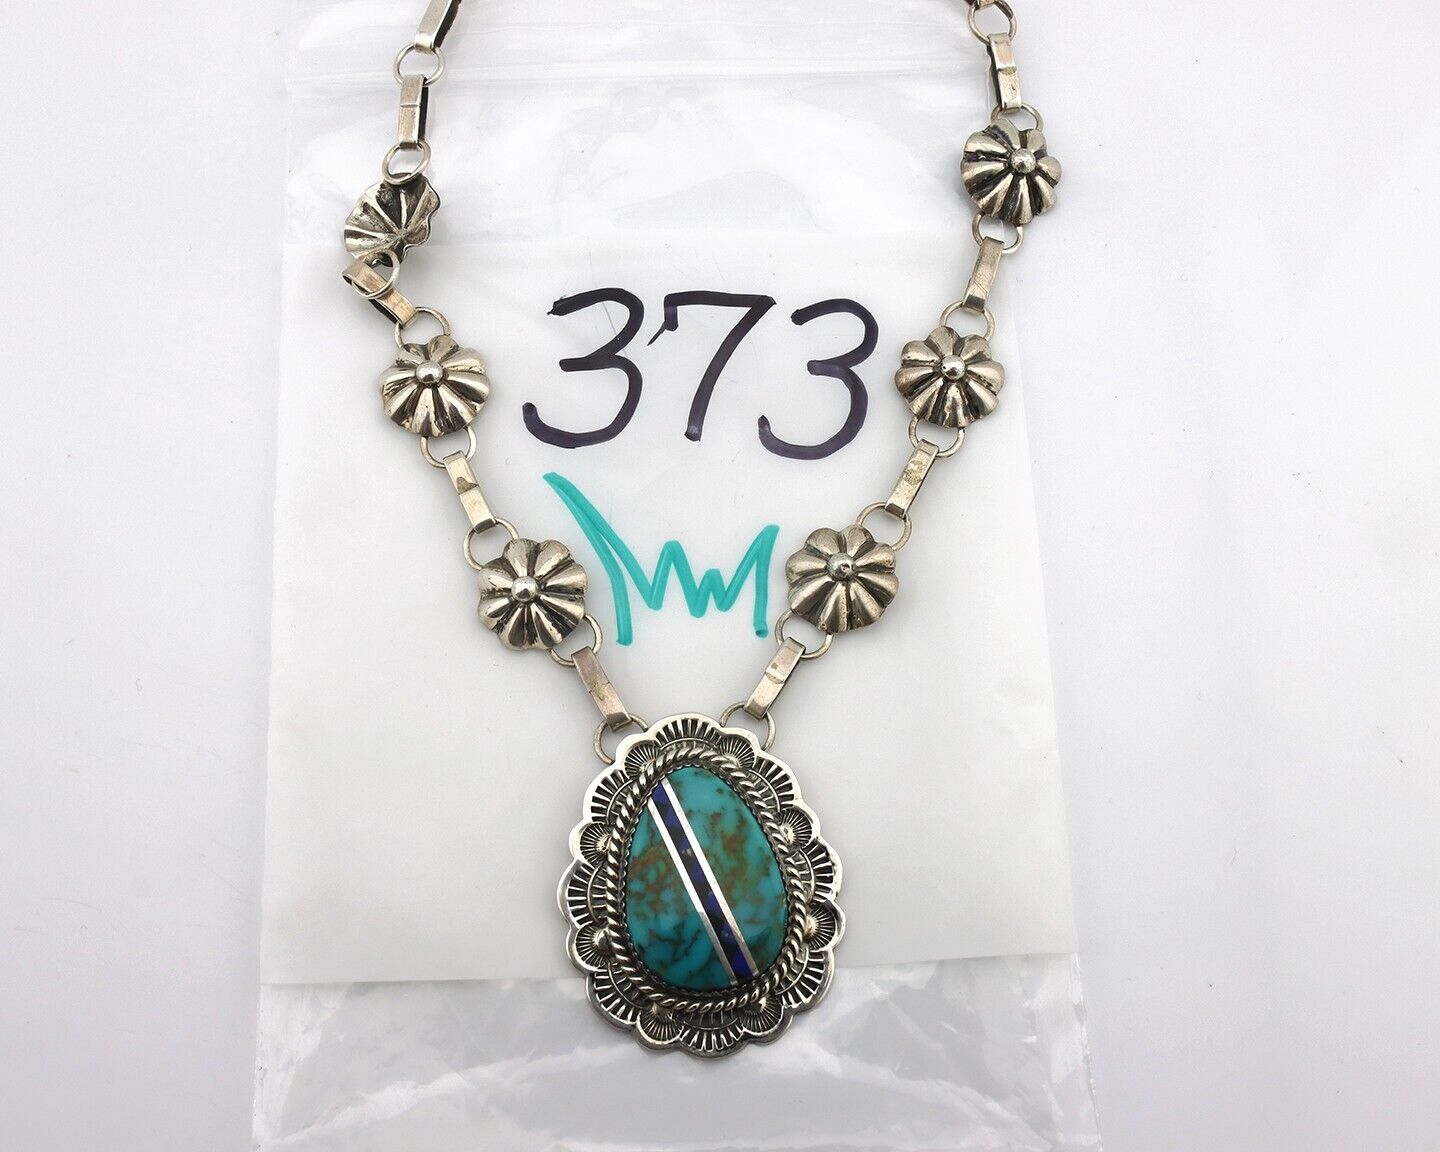 Navajo Necklace 925 Silver Turquoise, Onyx, Lapis Artist Signed M Begay C.80's